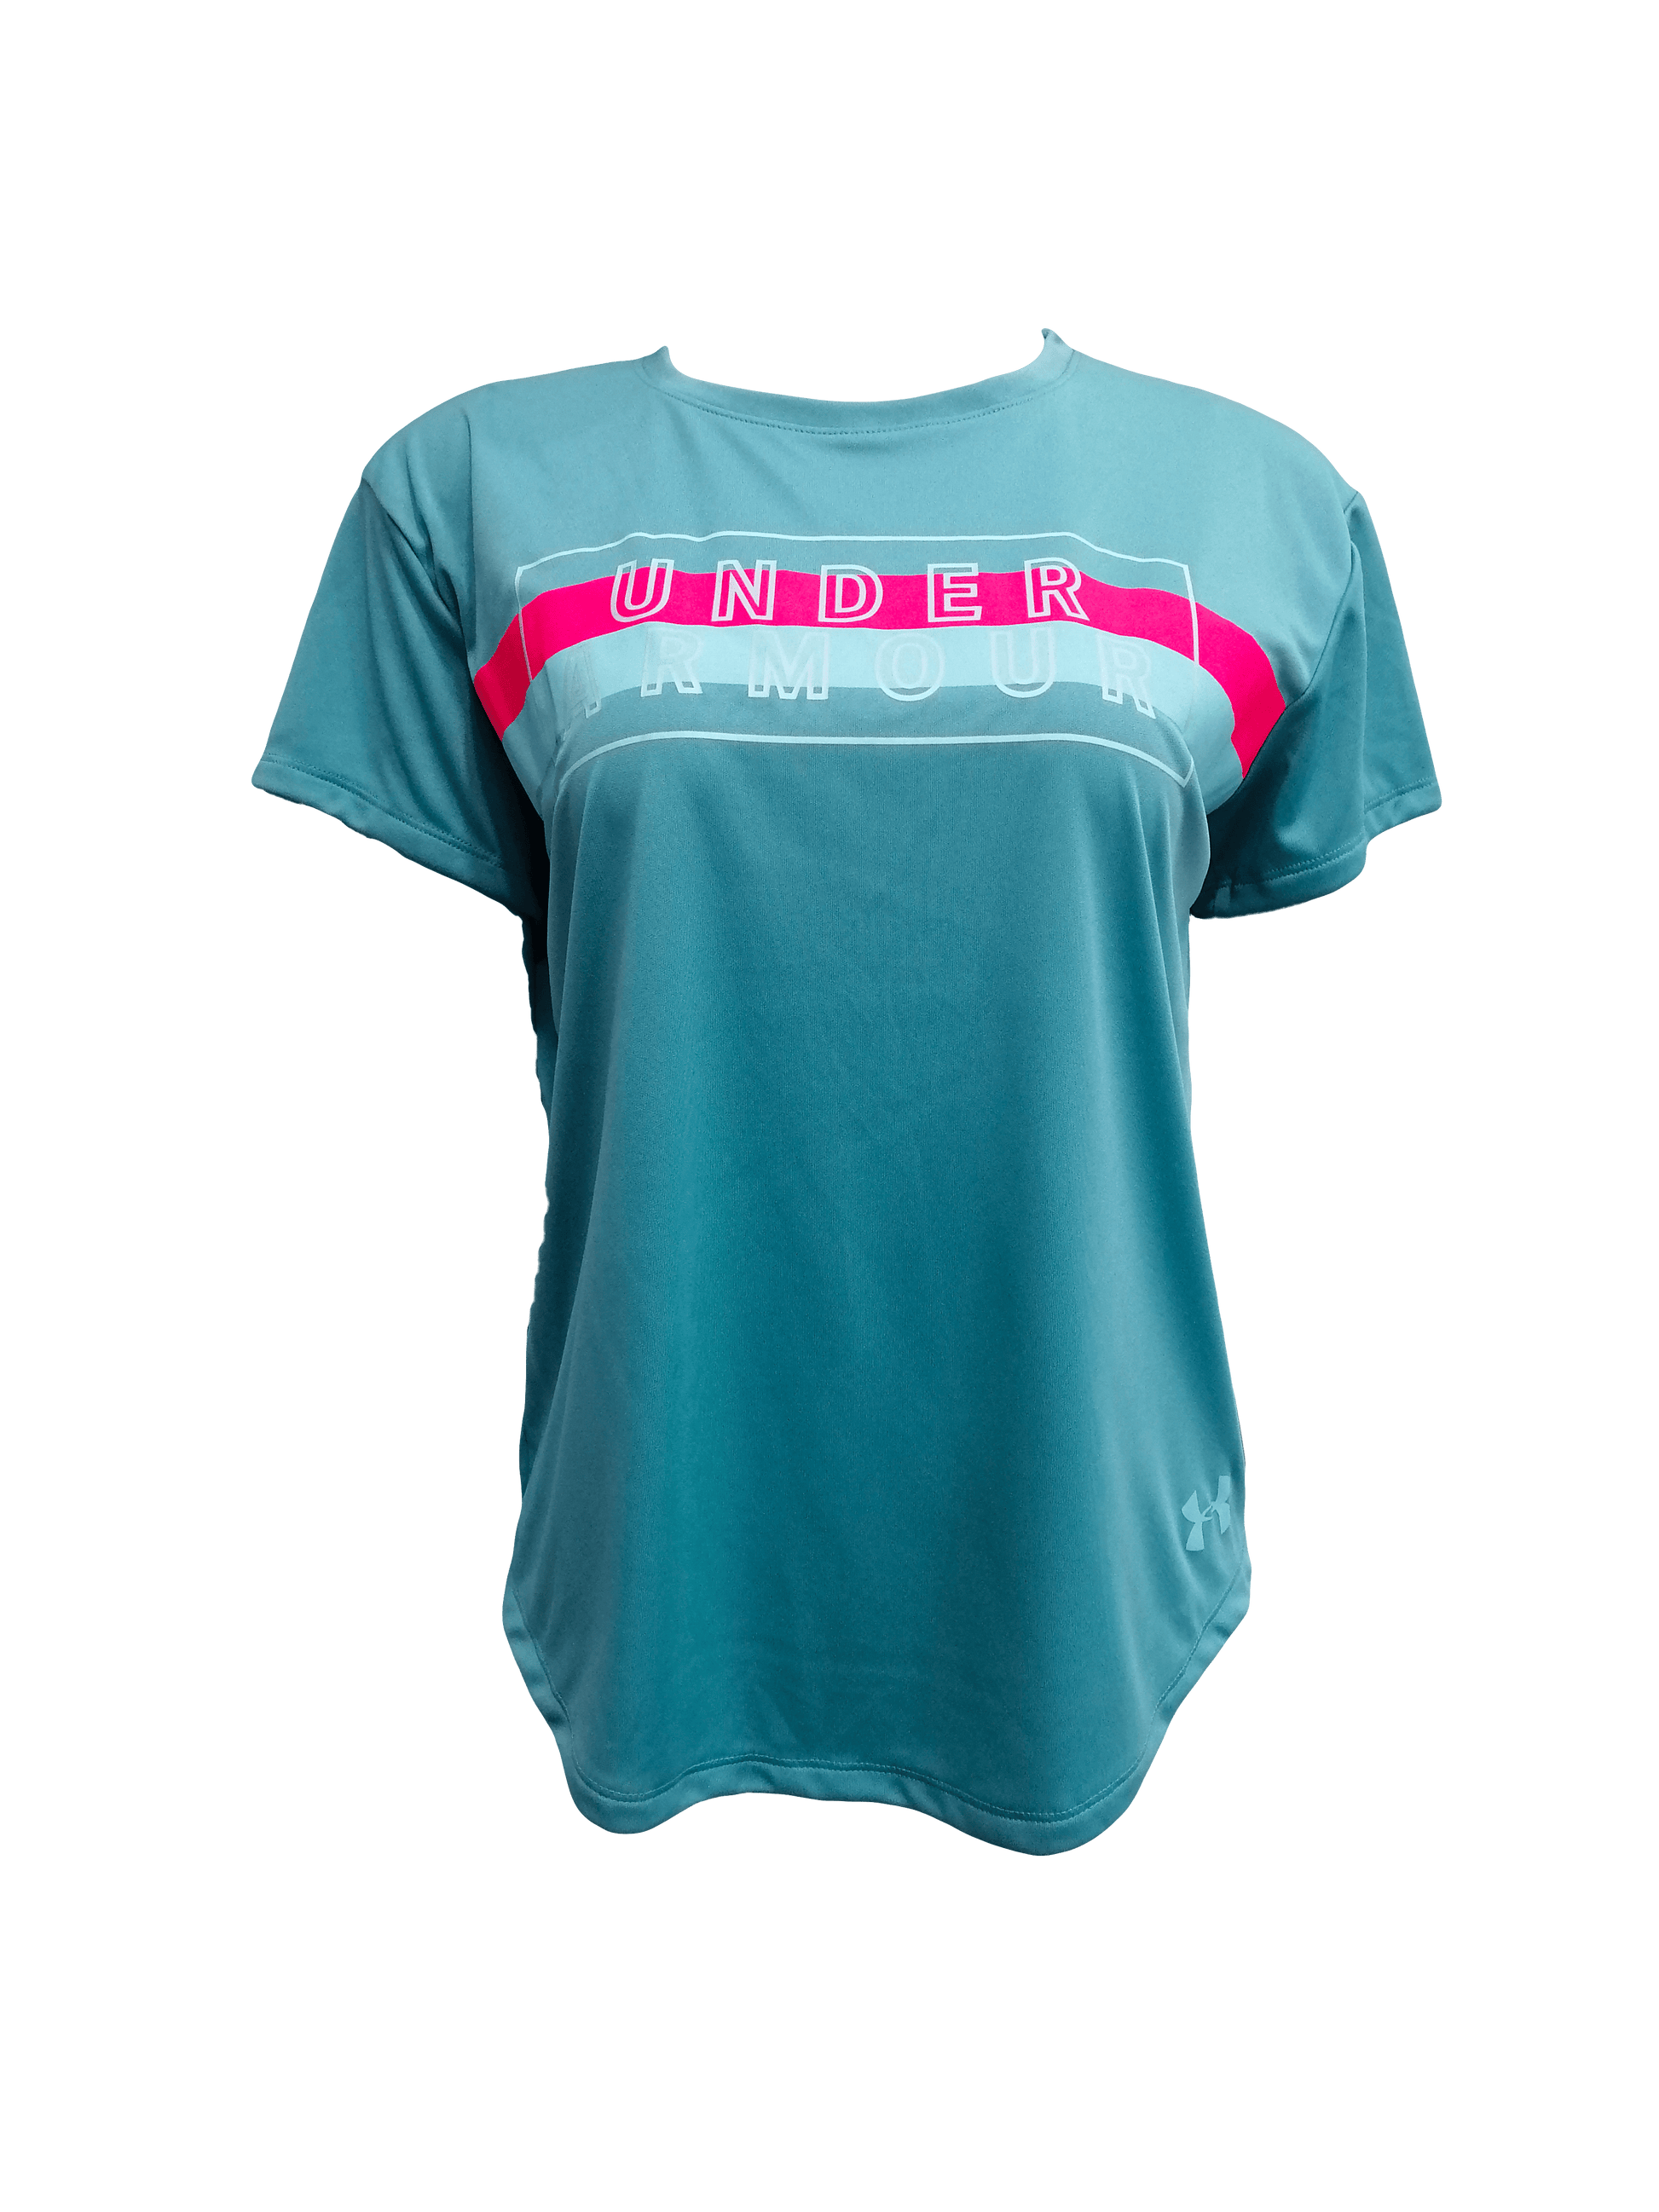 UNDER ARMOUR Womens sports S-M T-Shirt